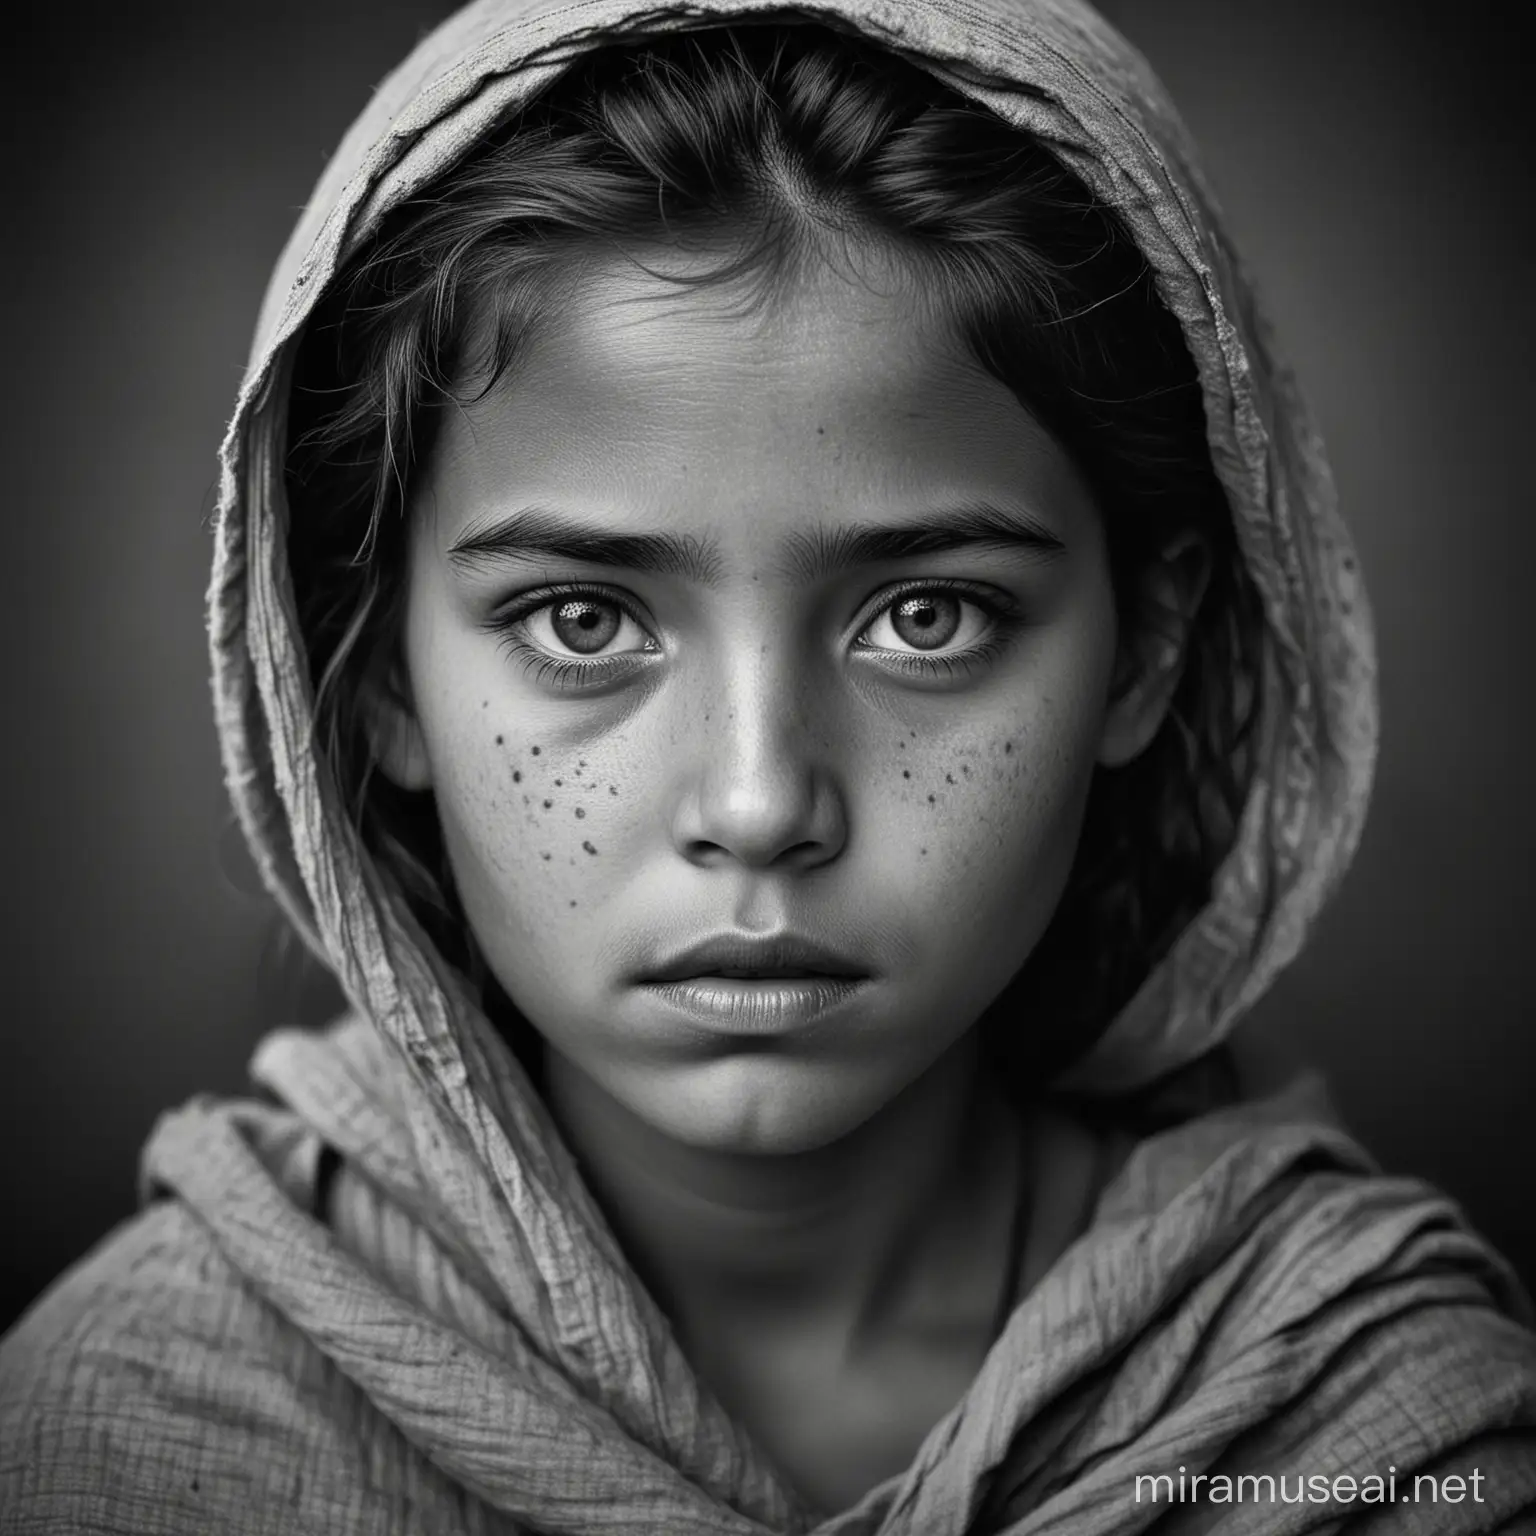 Impoverished Girls Compelling Portrait in Classic Black and White